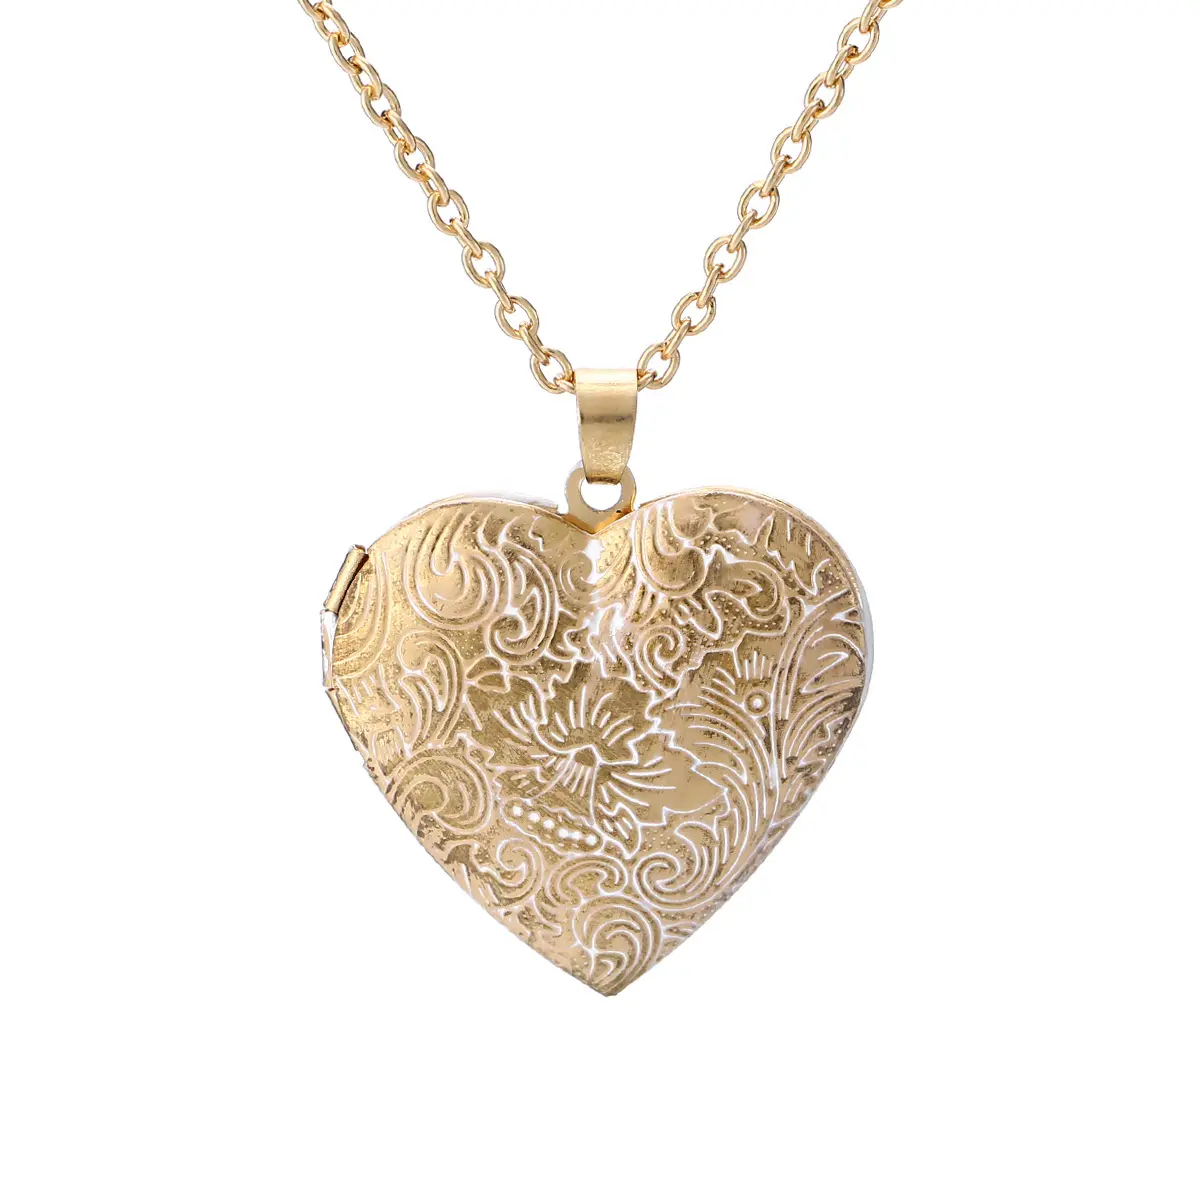 Personalized retro love shaped carved box pendant necklace heart can be opened item jewelry manufacturers wholesale